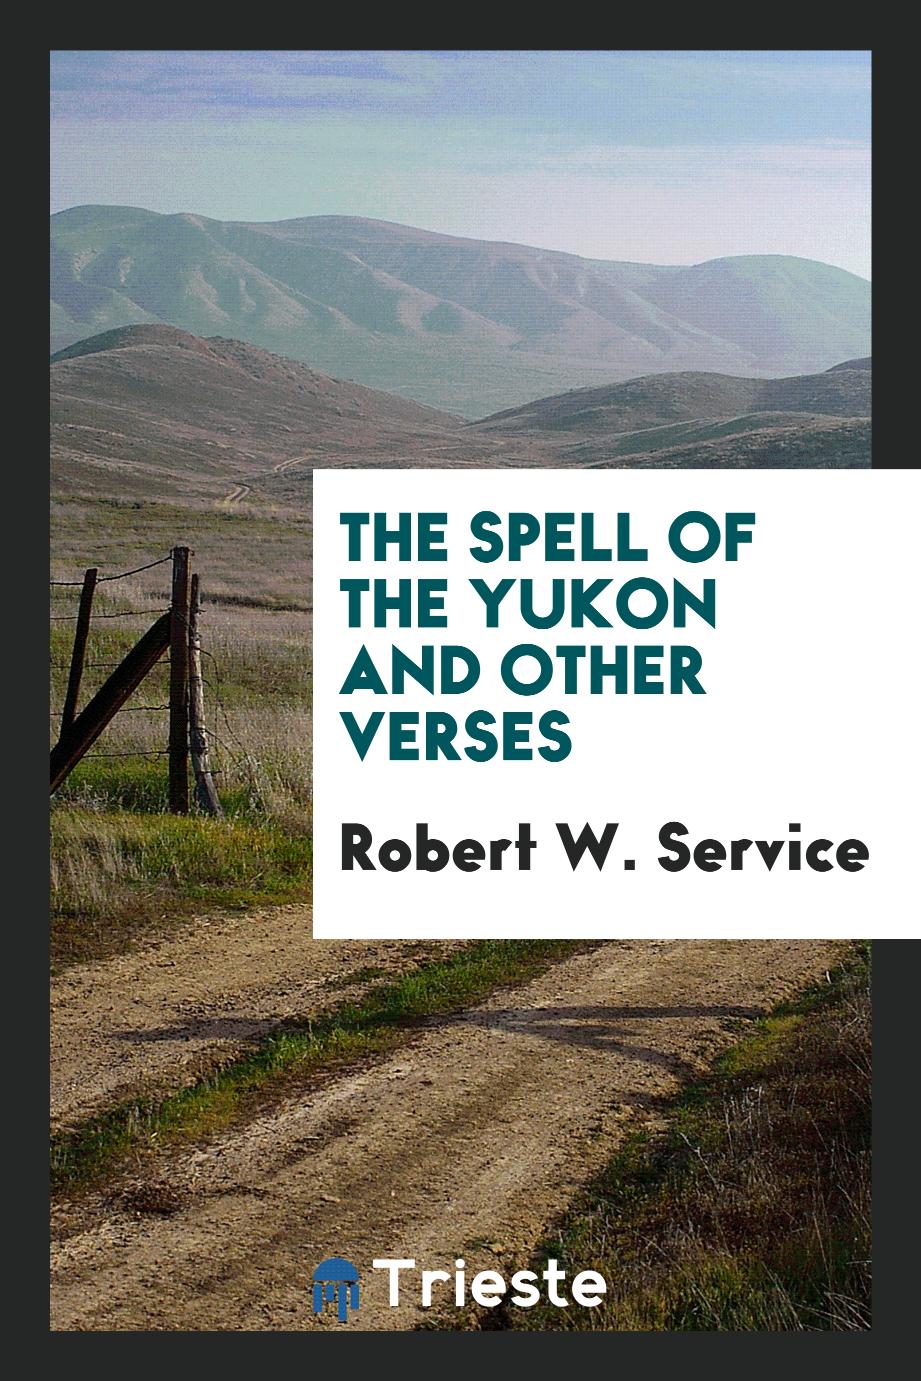 The spell of the Yukon and other verses